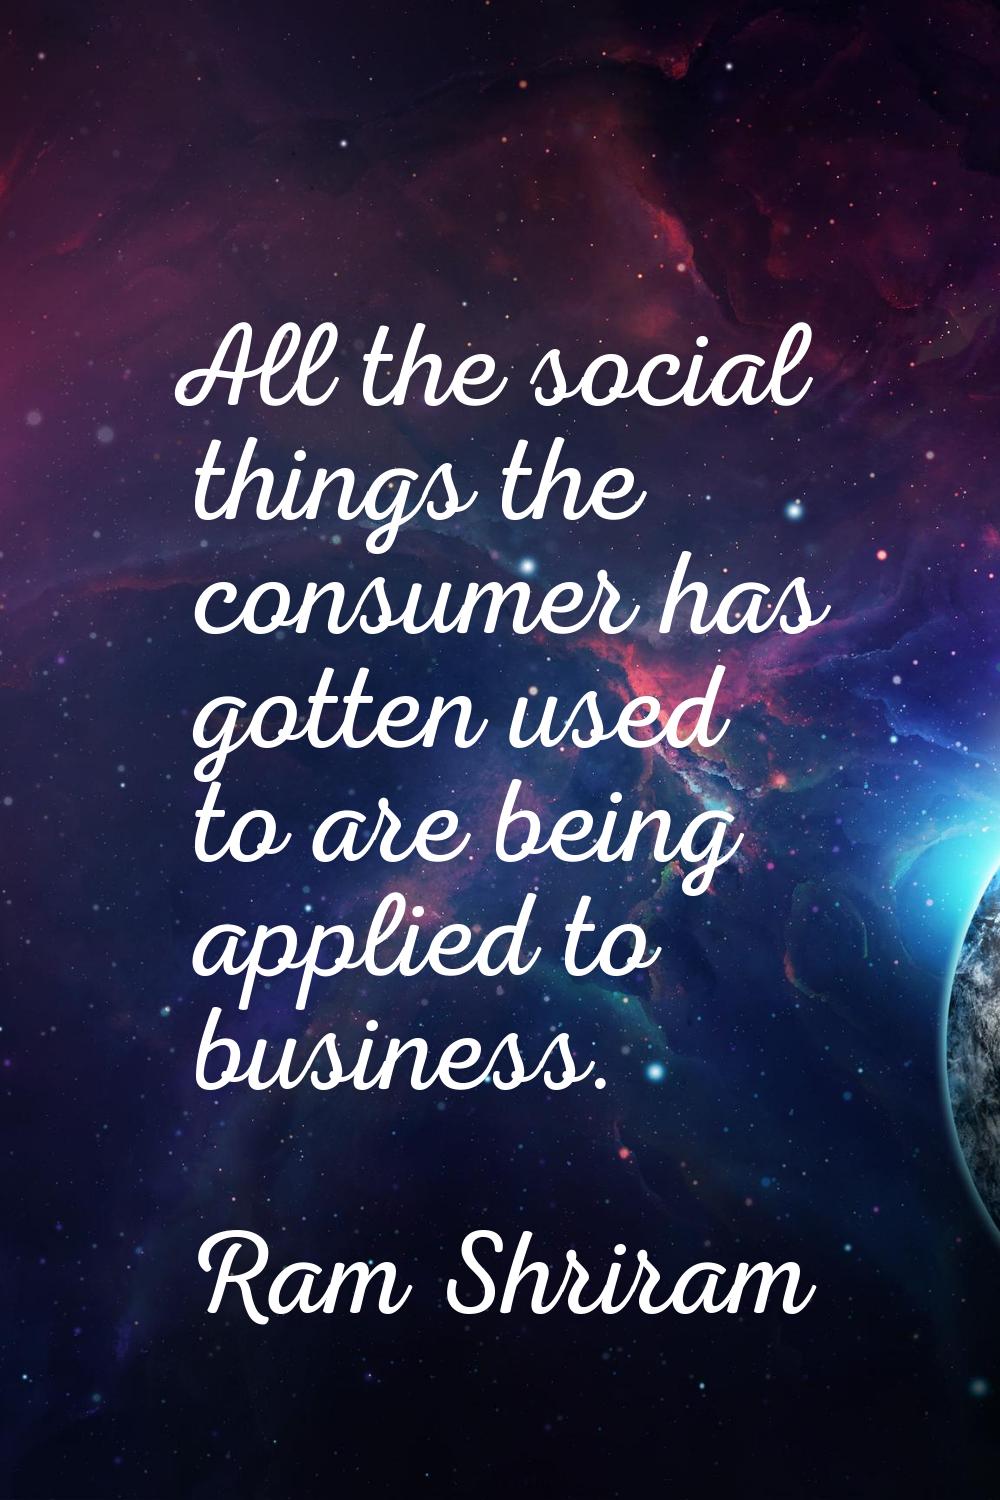 All the social things the consumer has gotten used to are being applied to business.